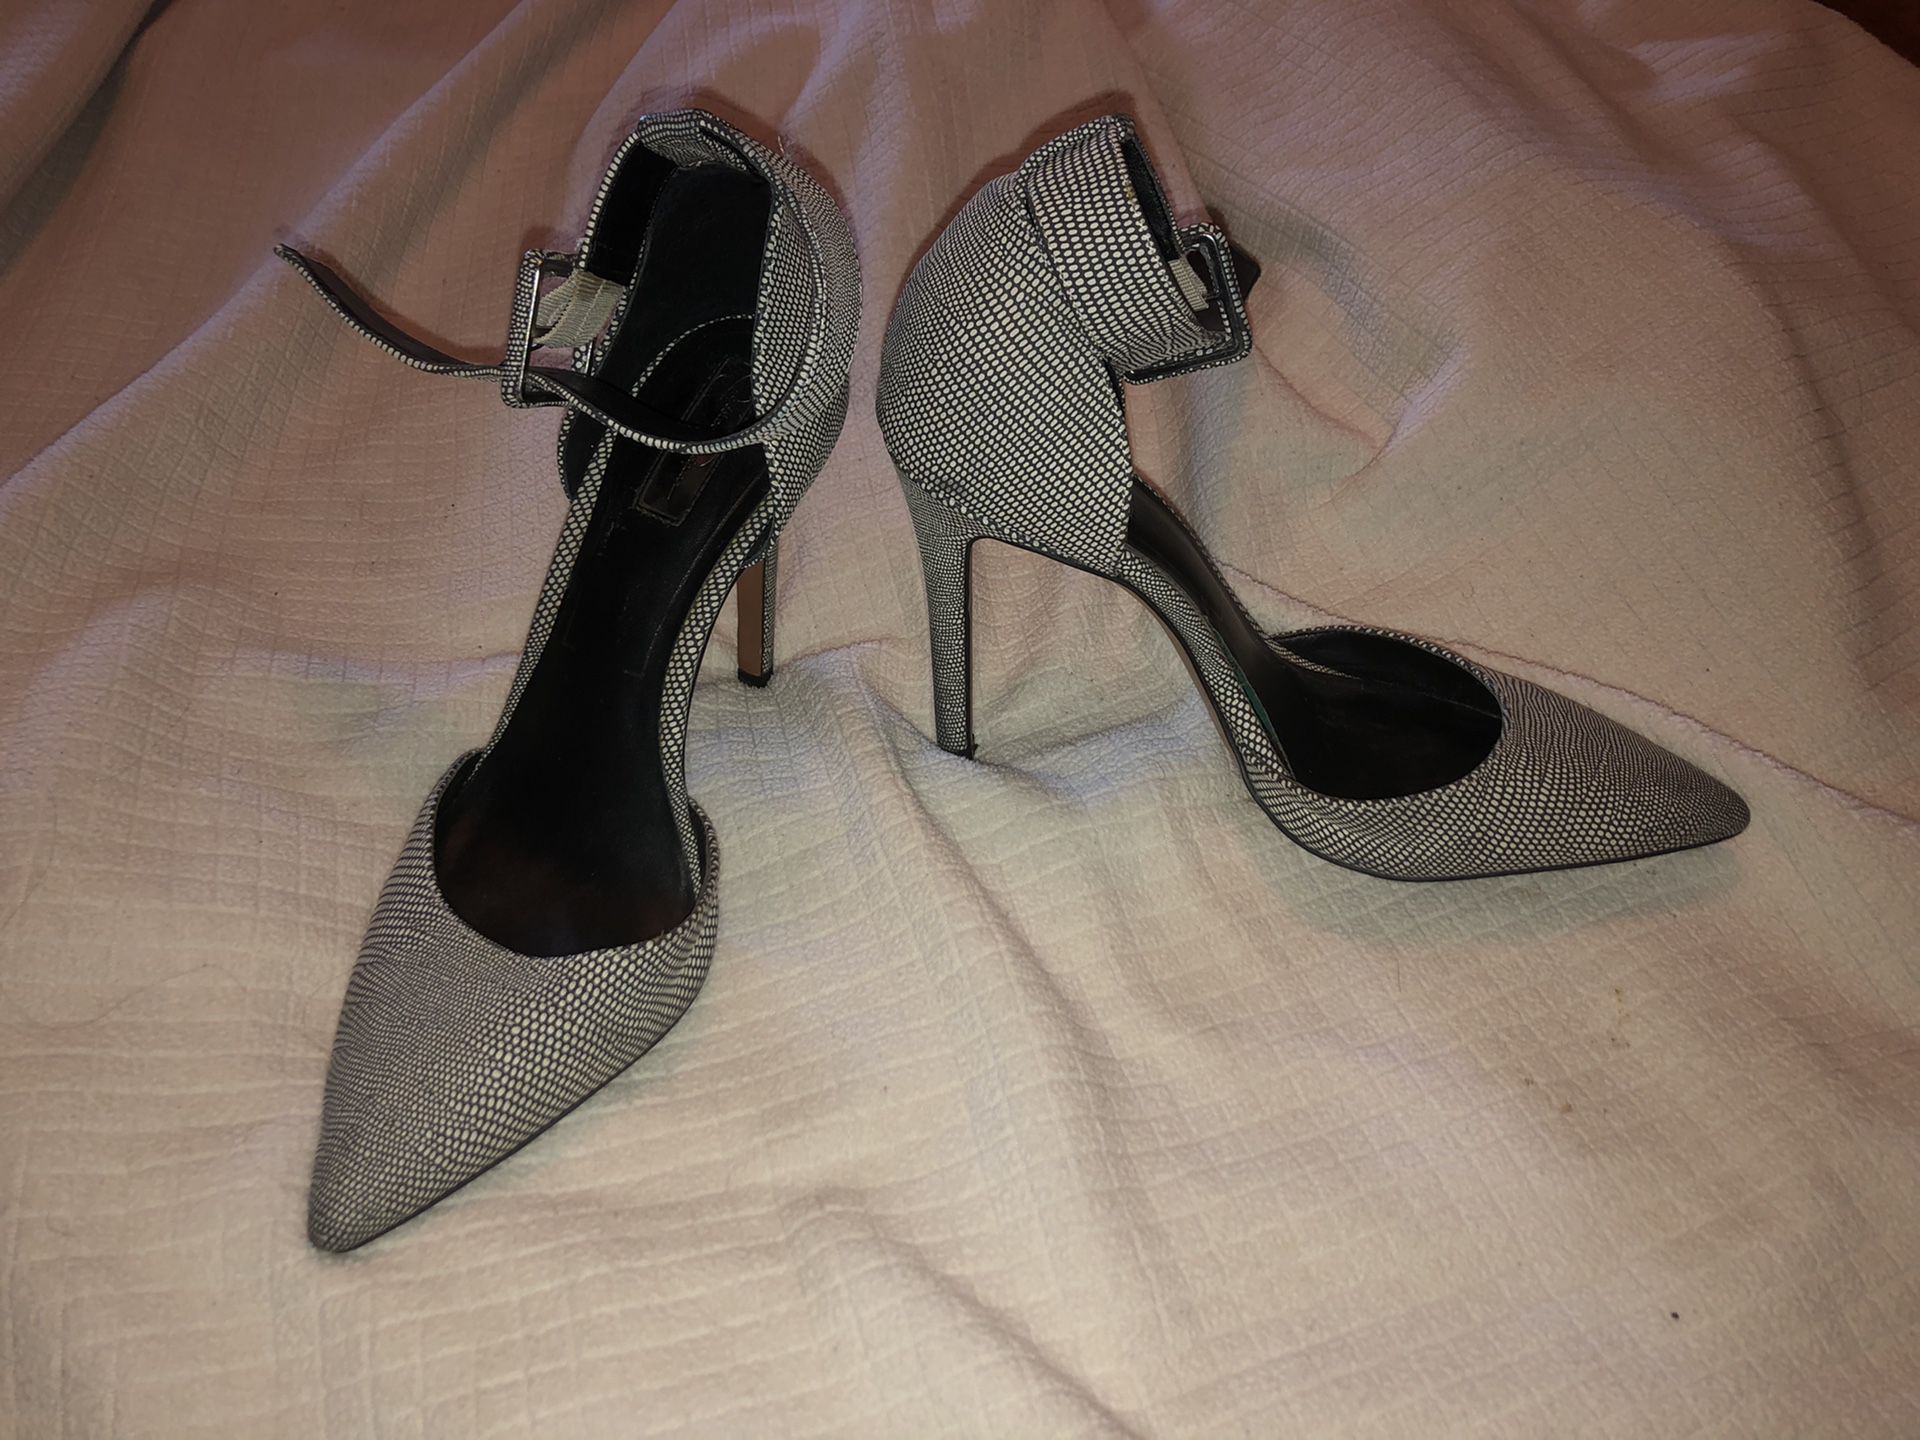 Jessica Simpson shoes heels size 7 elegant black and white pointy shoe